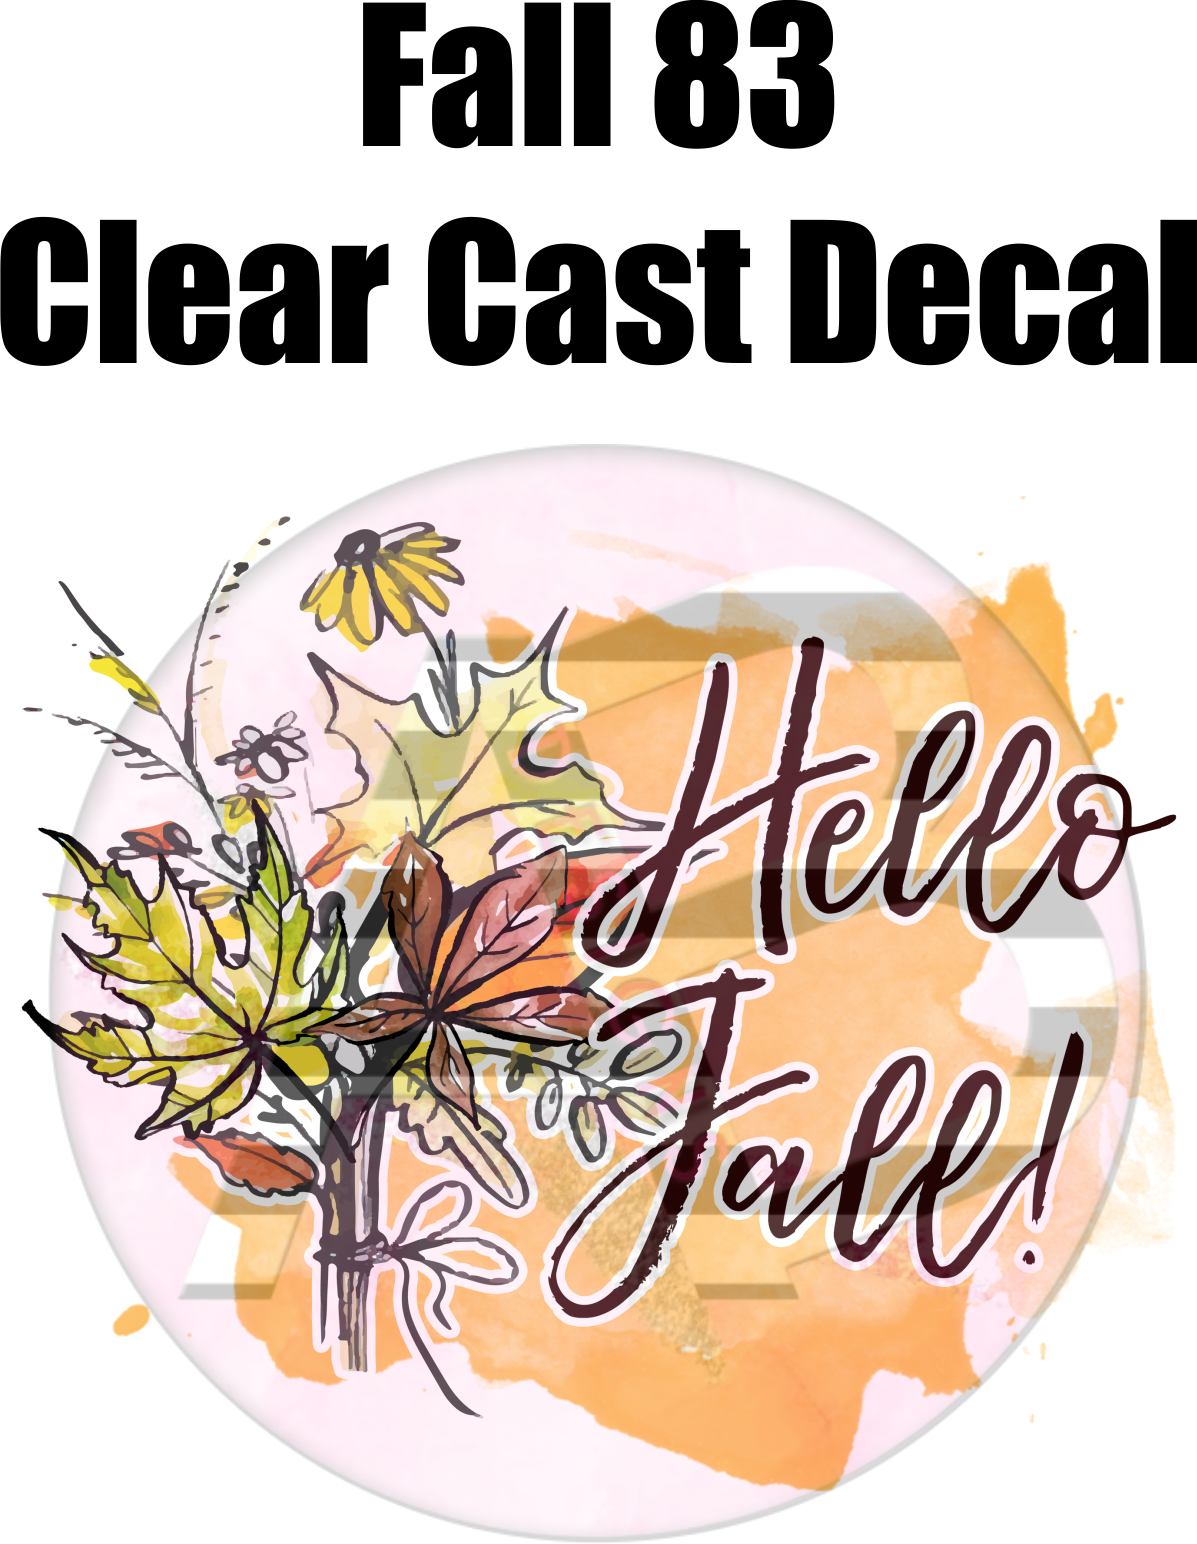 Fall 83 - Clear Cast Decal